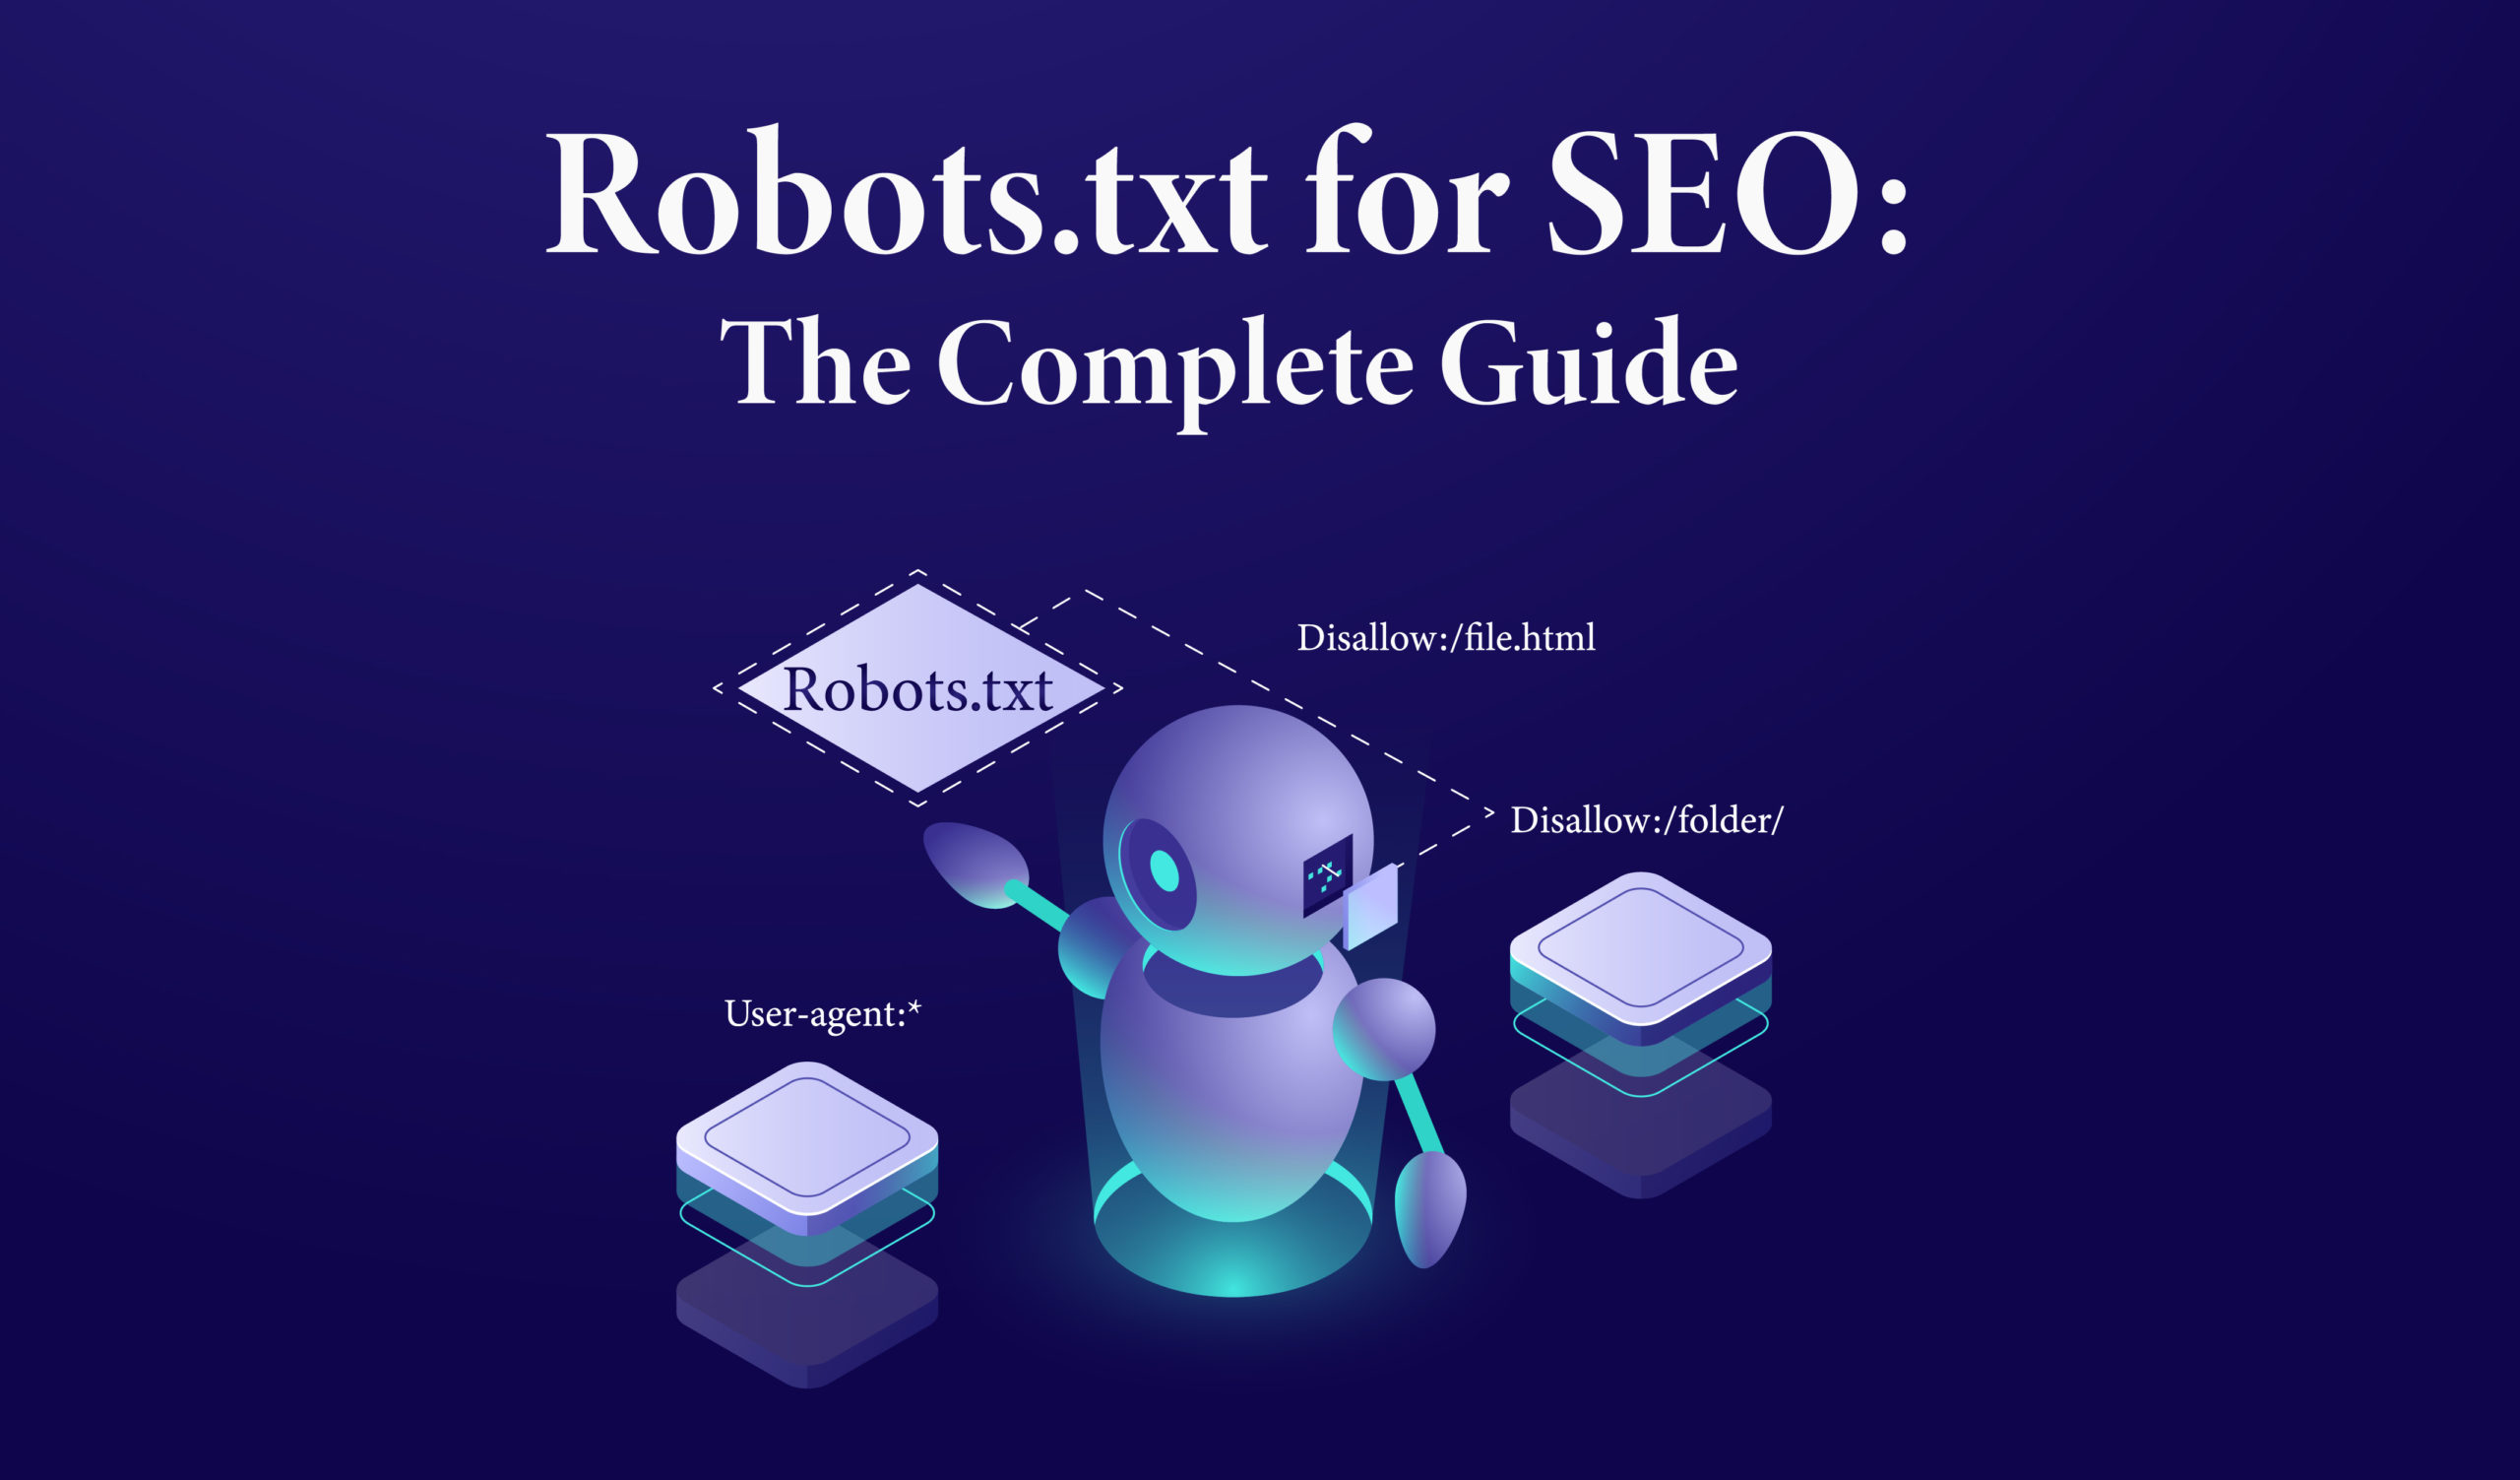 Robots.txt for SEO: The complete guide